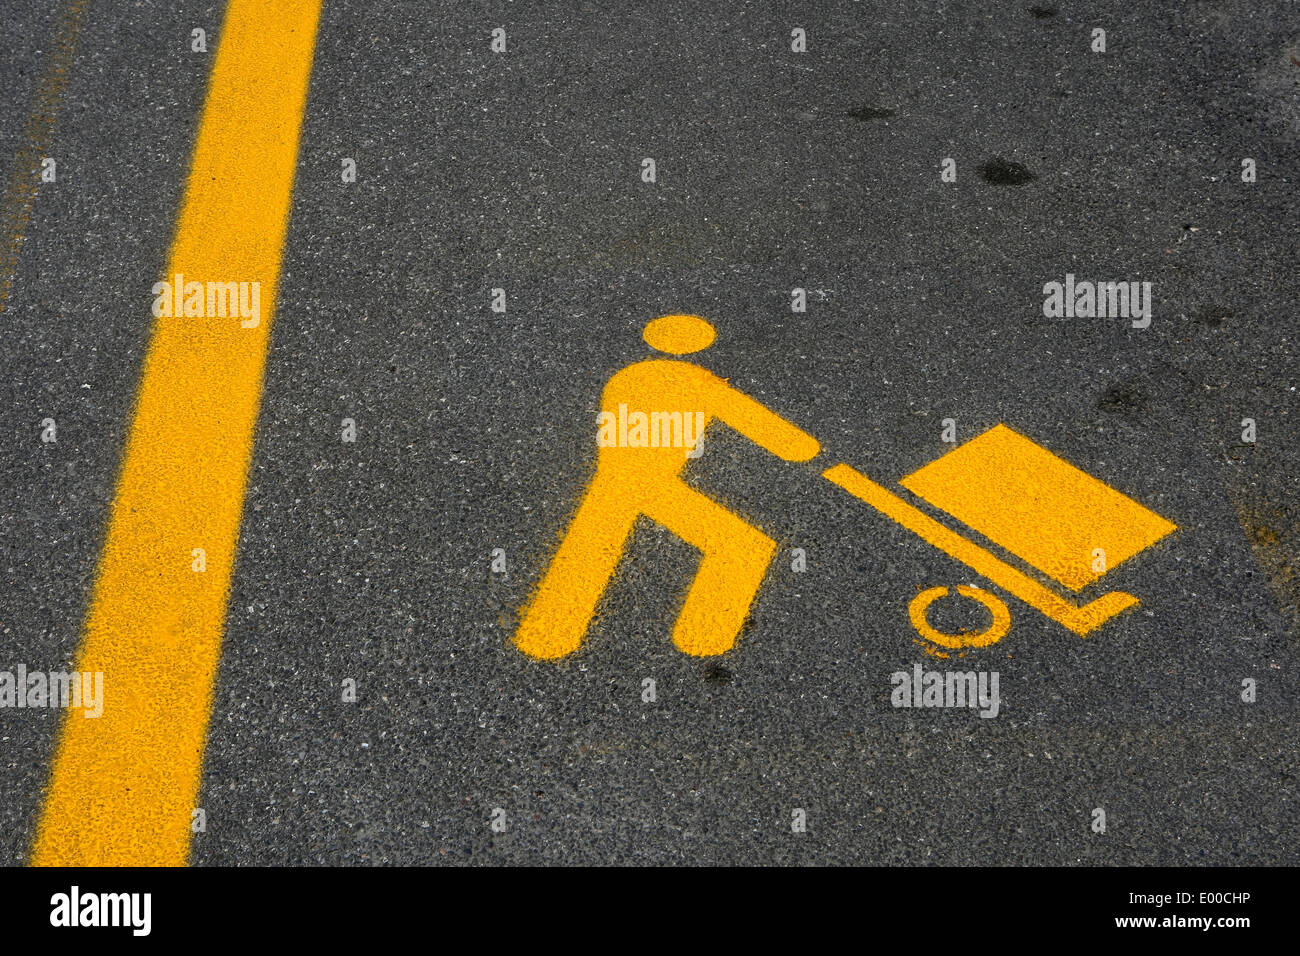 yellow parking symbol on the asphalt,signaling a loading and unloading area Stock Photo